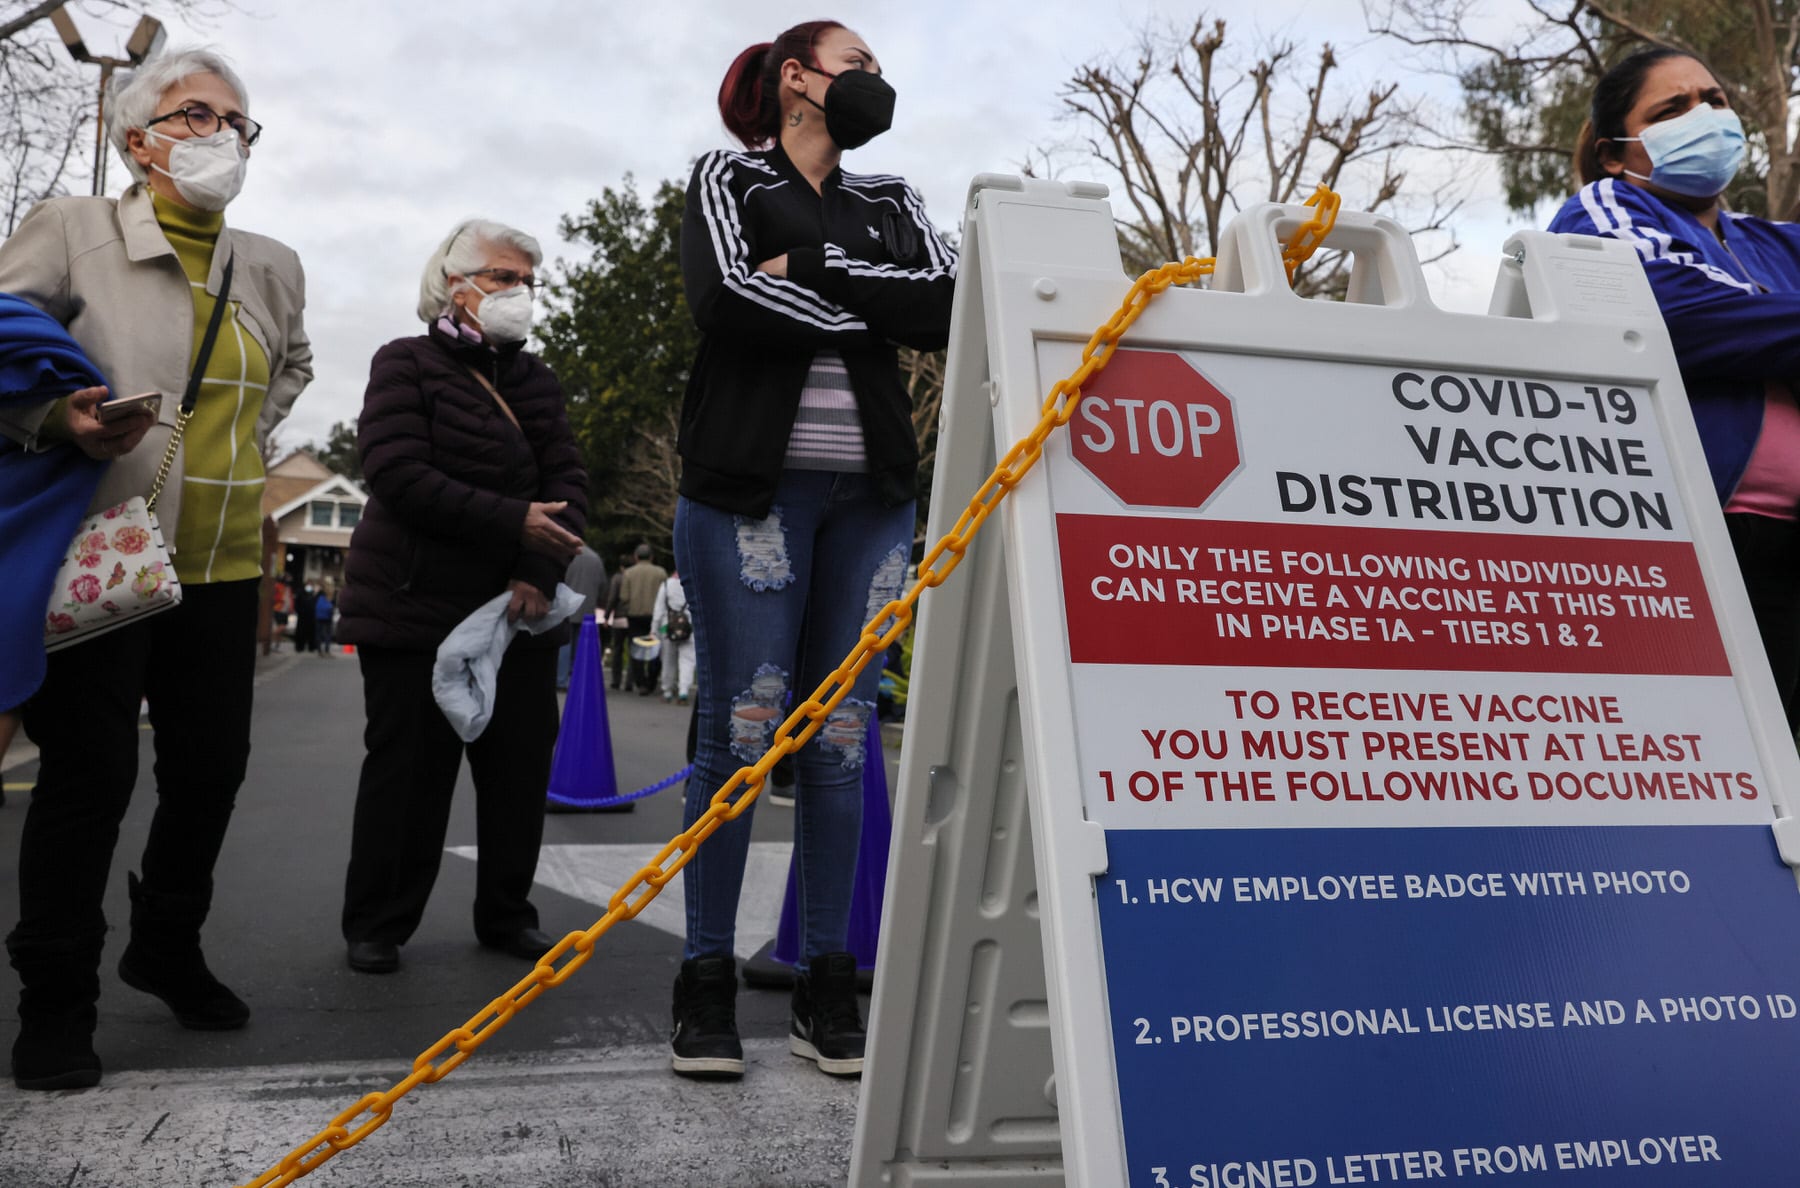 eople wait outside a COVID-19 vaccine distribution center.